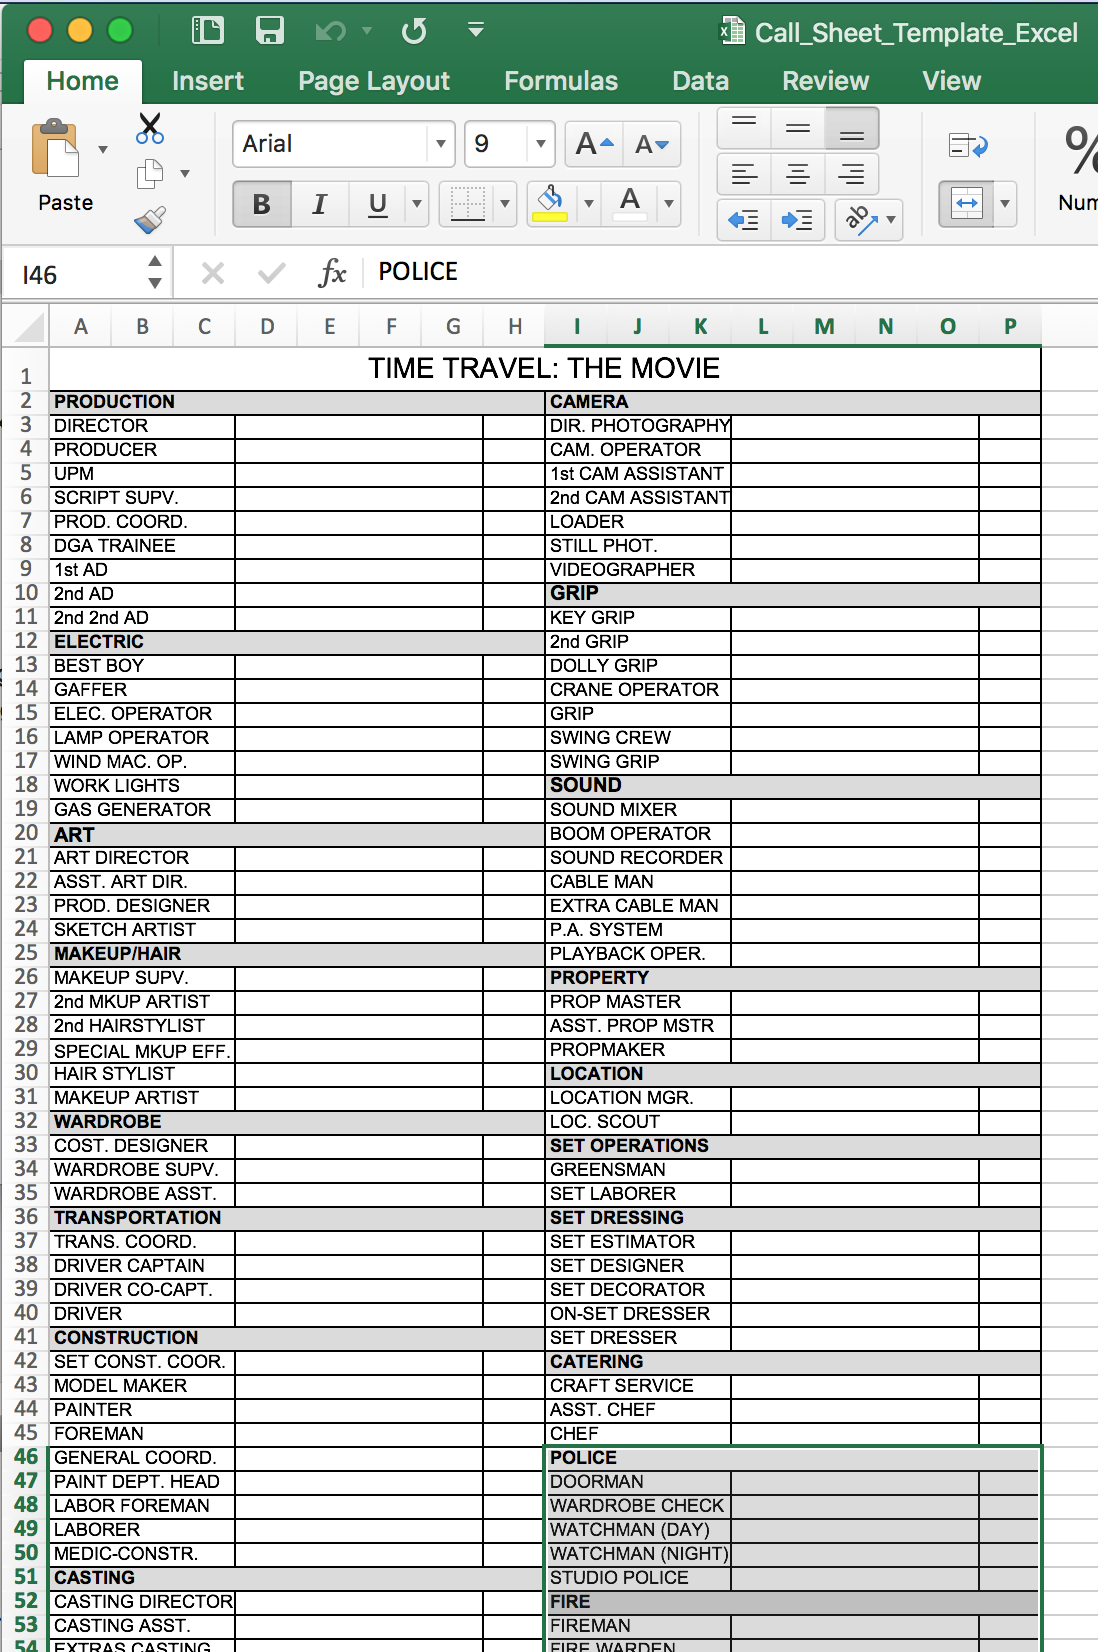 FREE Call Sheet Template in Excel